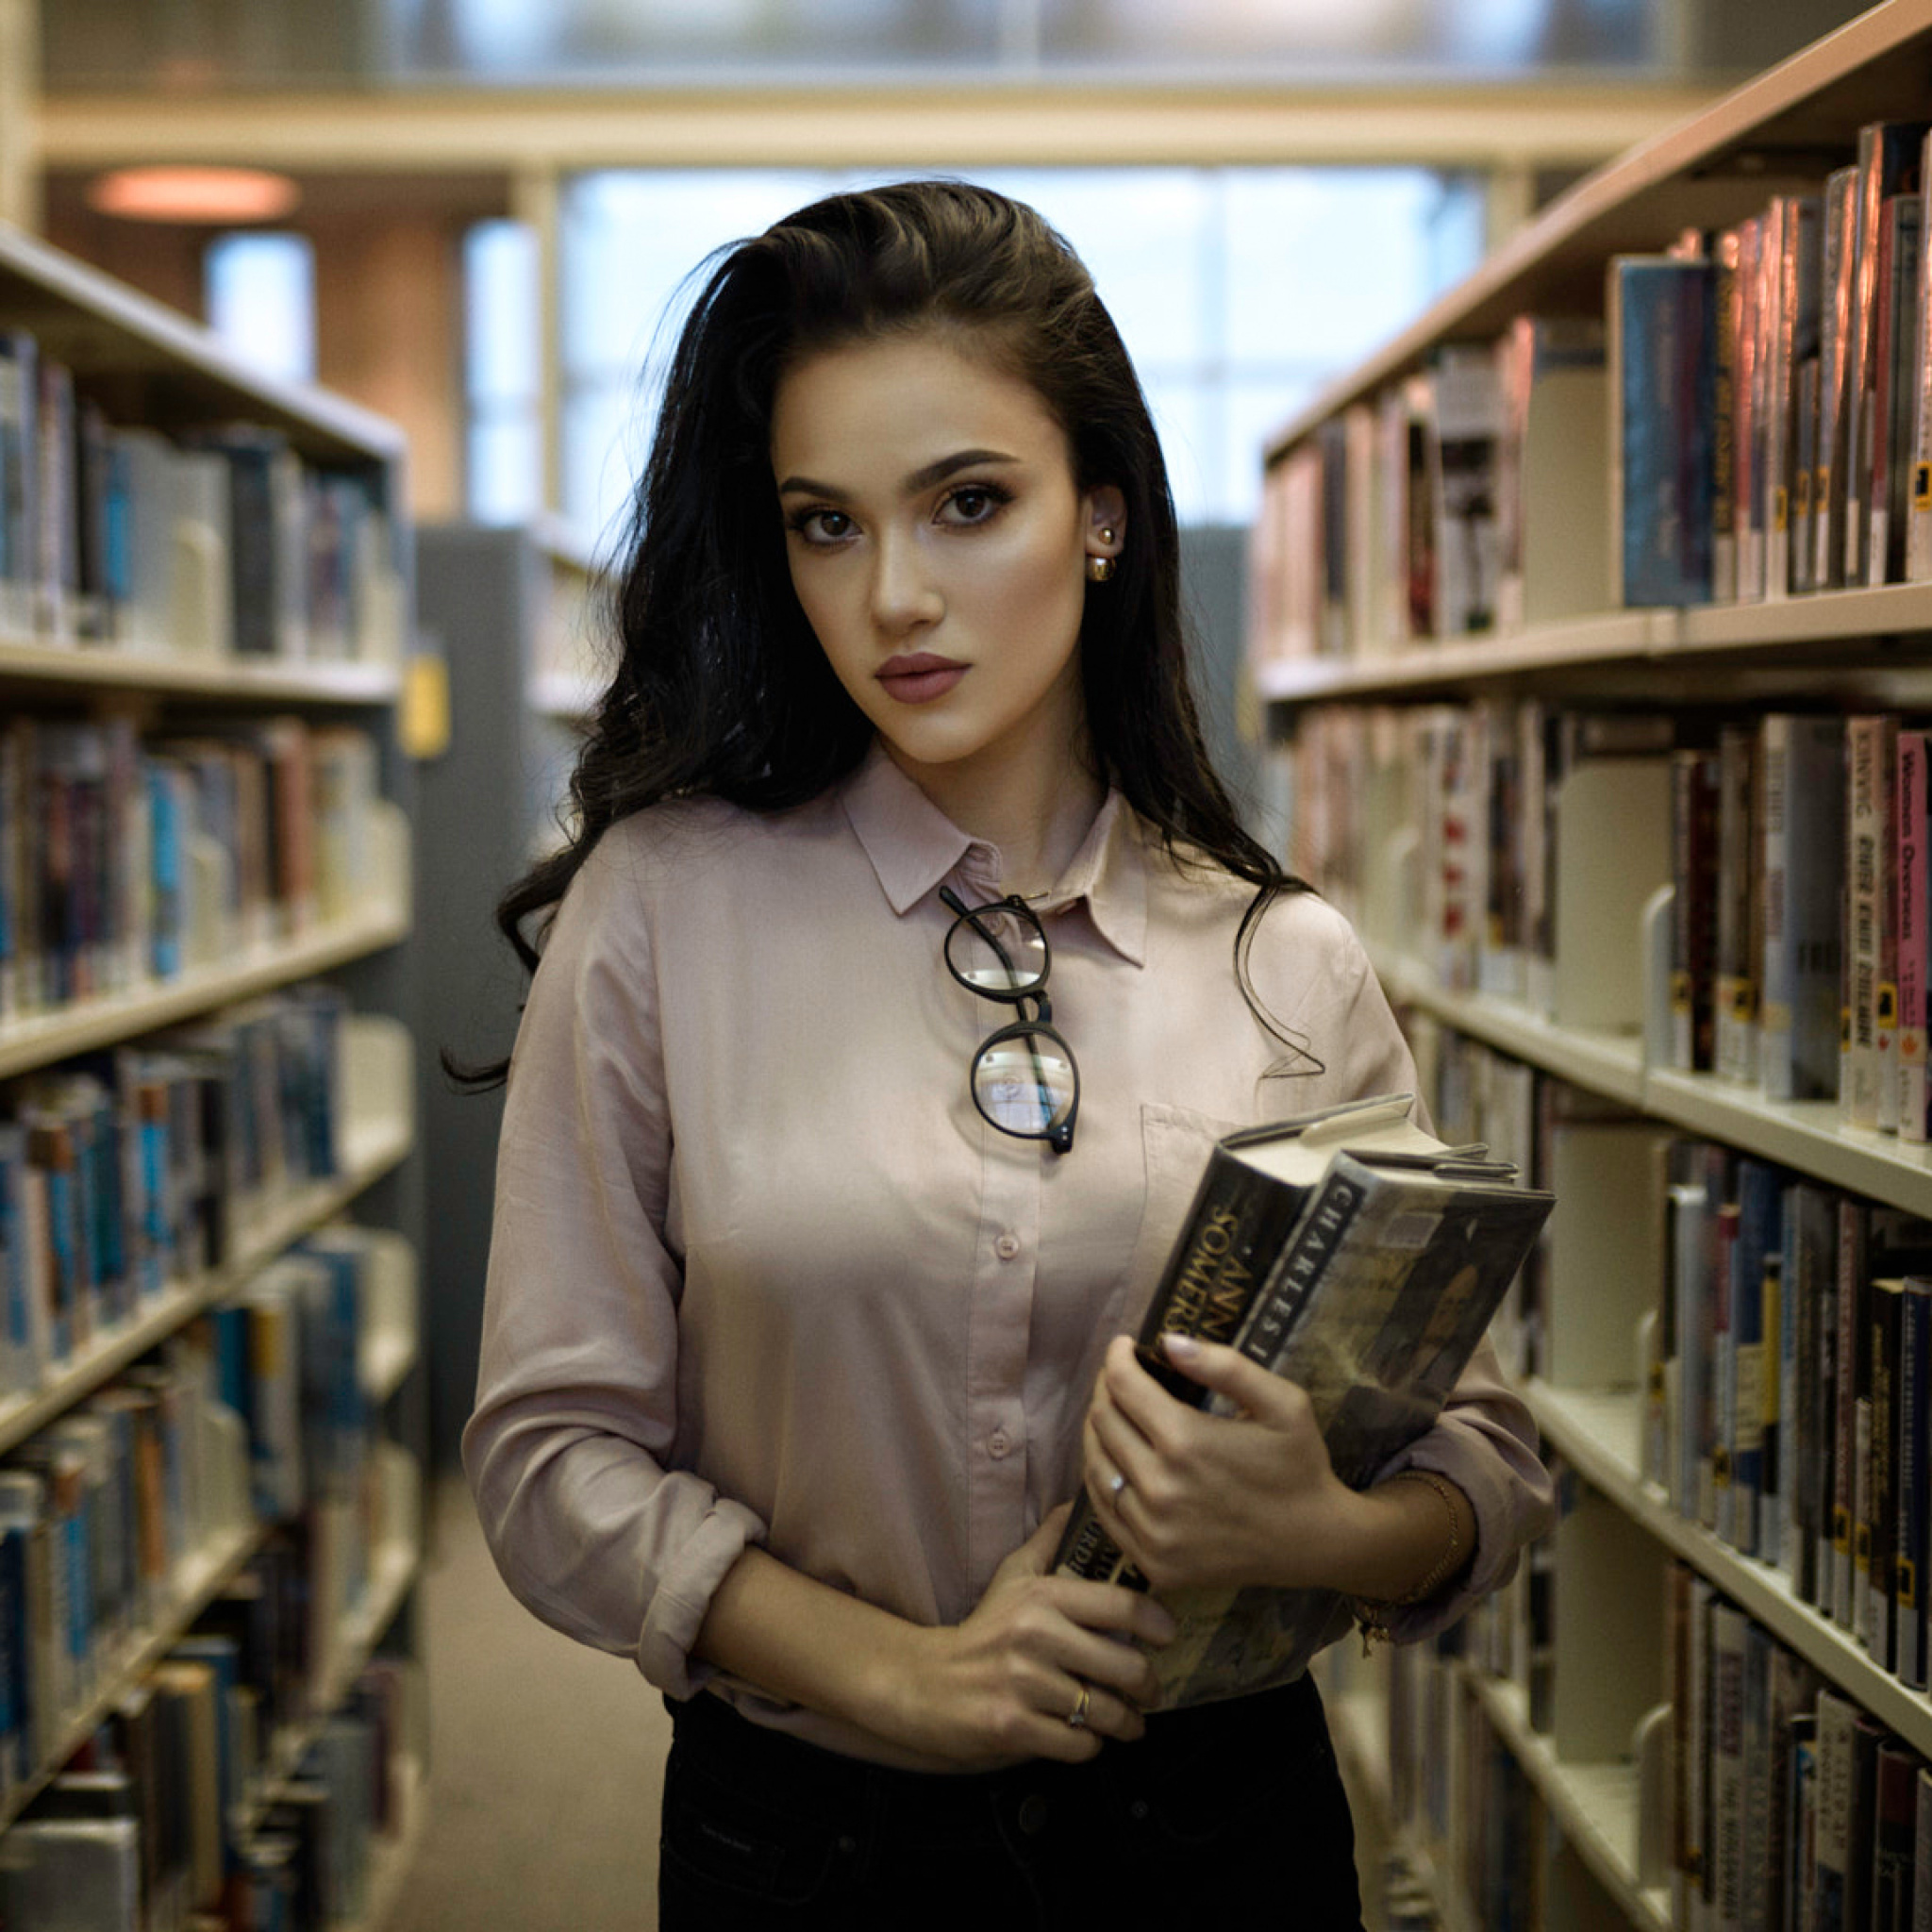 Das Girl with books in library Wallpaper 2048x2048